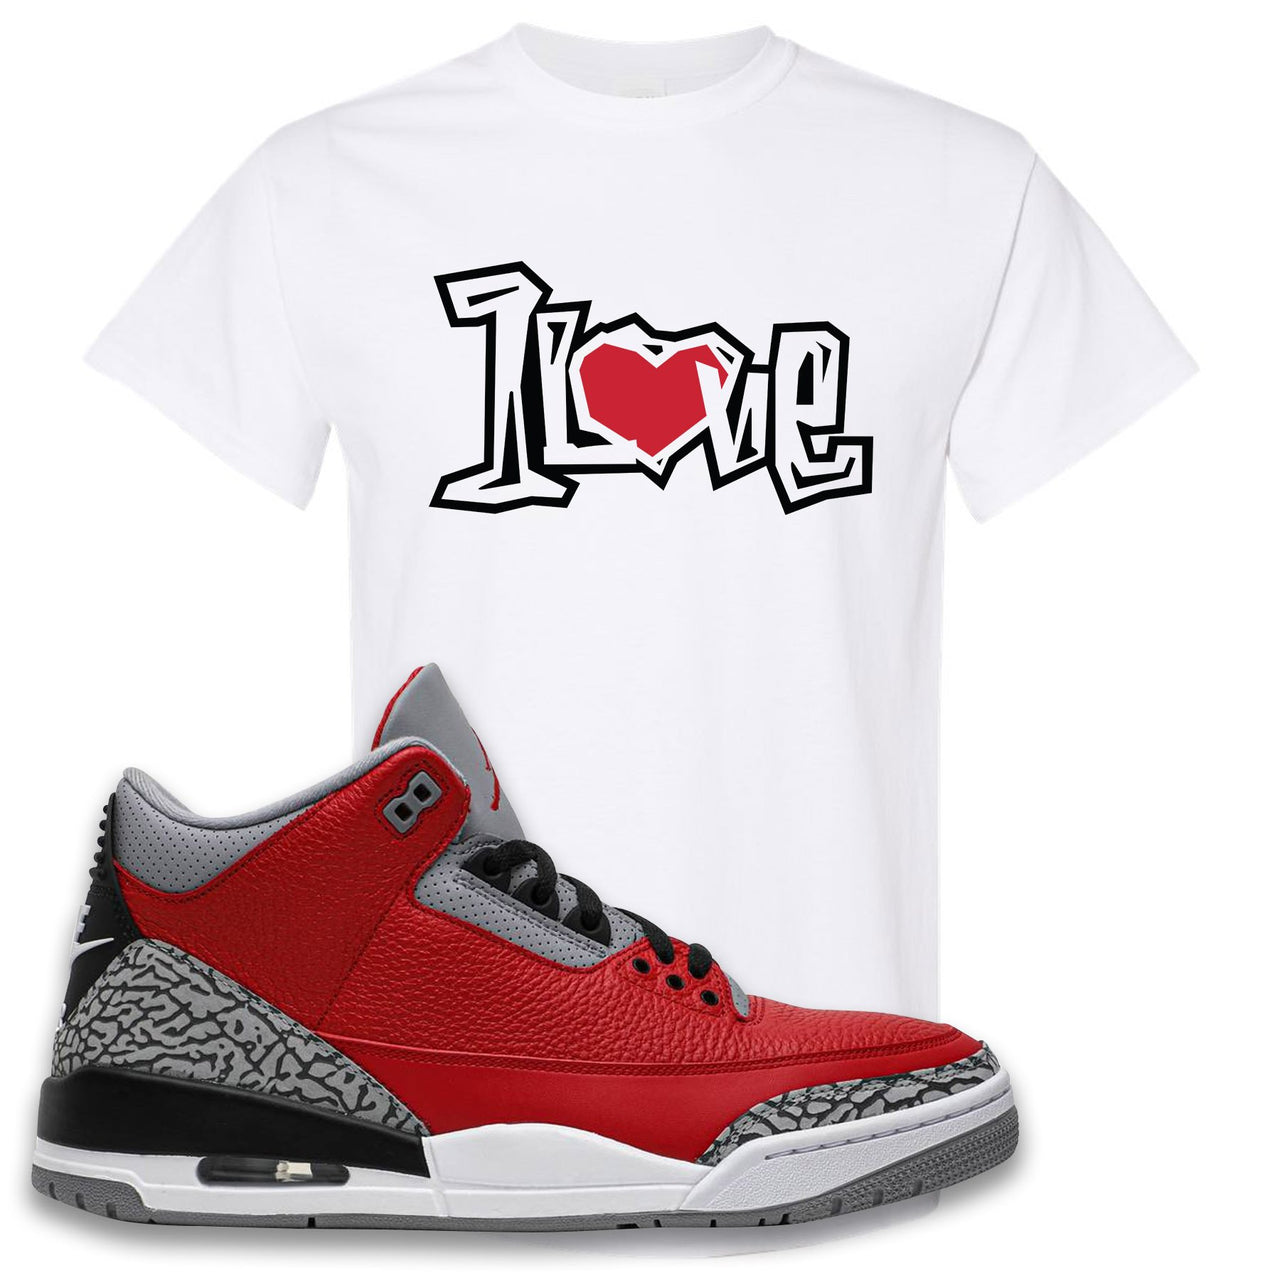 Jordan 3 Red Cement Chicago All-Star Sneaker White T Shirt | Tees to match Jordan 3 All Star Red Cement Shoes | 1 Love